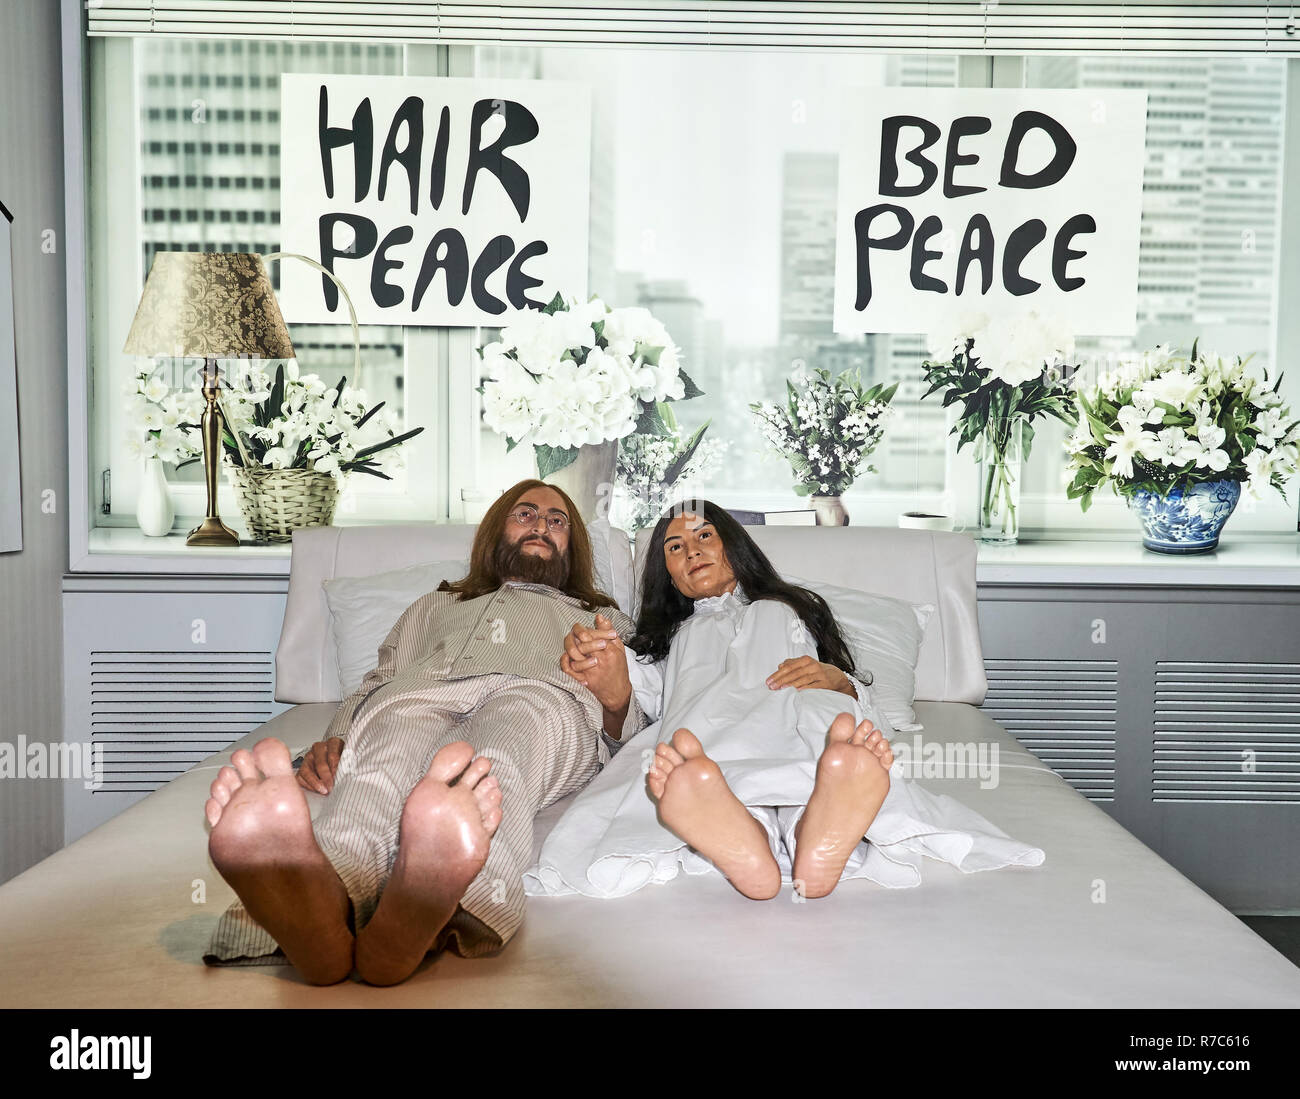 MONTREAL, CANADA - SEPTEMBER 23, 2018: John Lennon and Yoko Ono in the bed.  Wax museum Grevin in Montreal, Quebec, Canada Stock Photo - Alamy